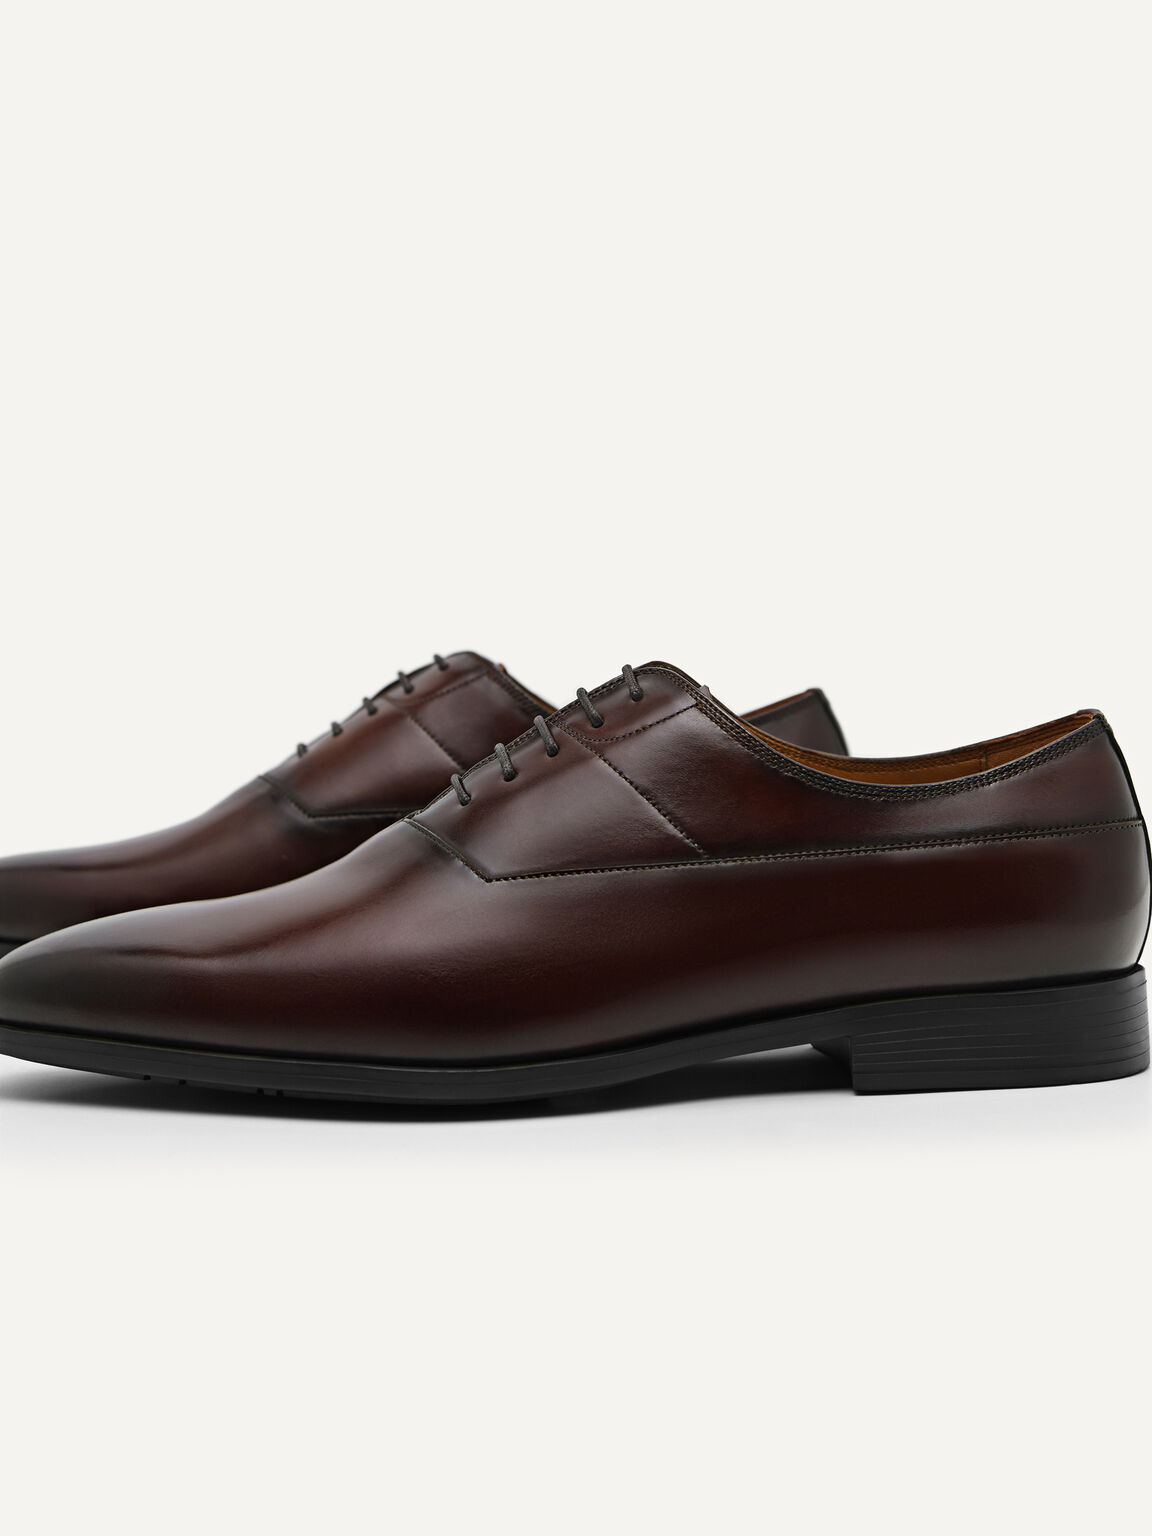 Altitude Leather Oxfords, Brown